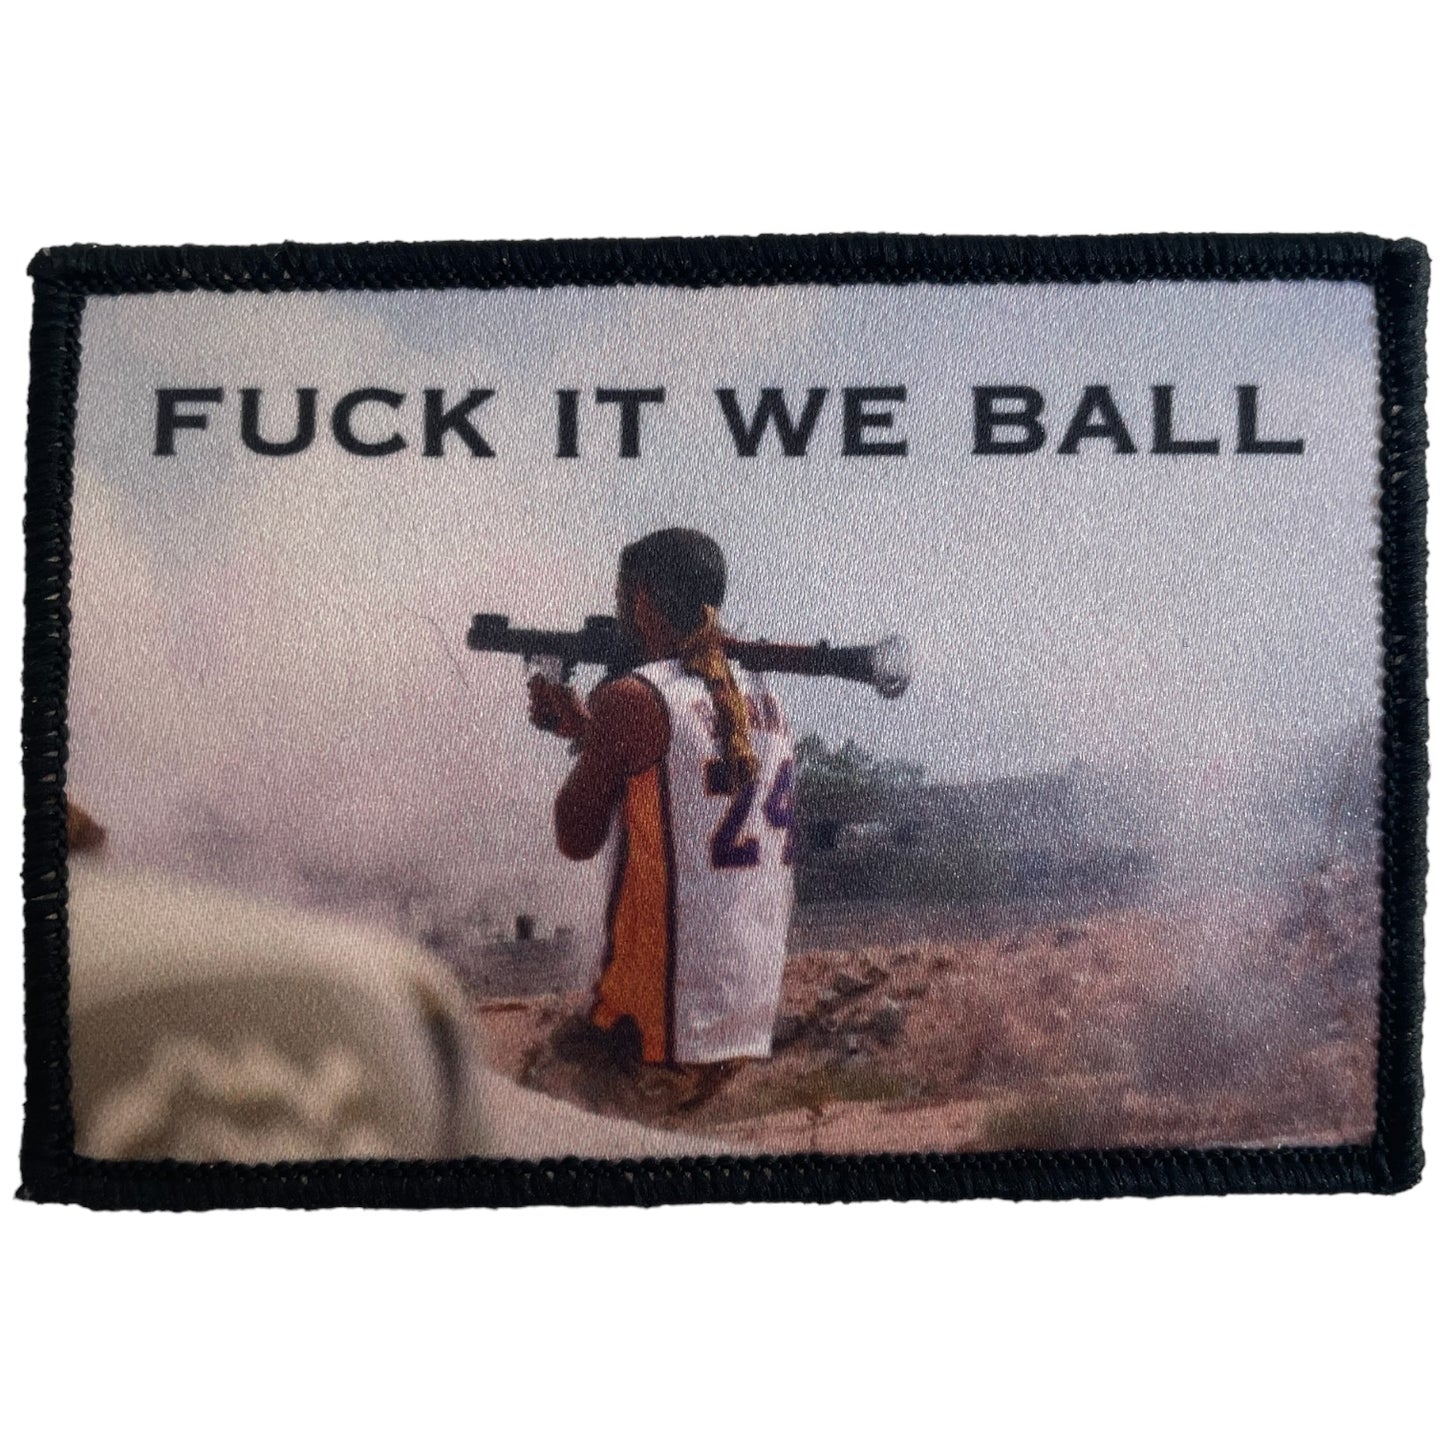 We Ball Patch